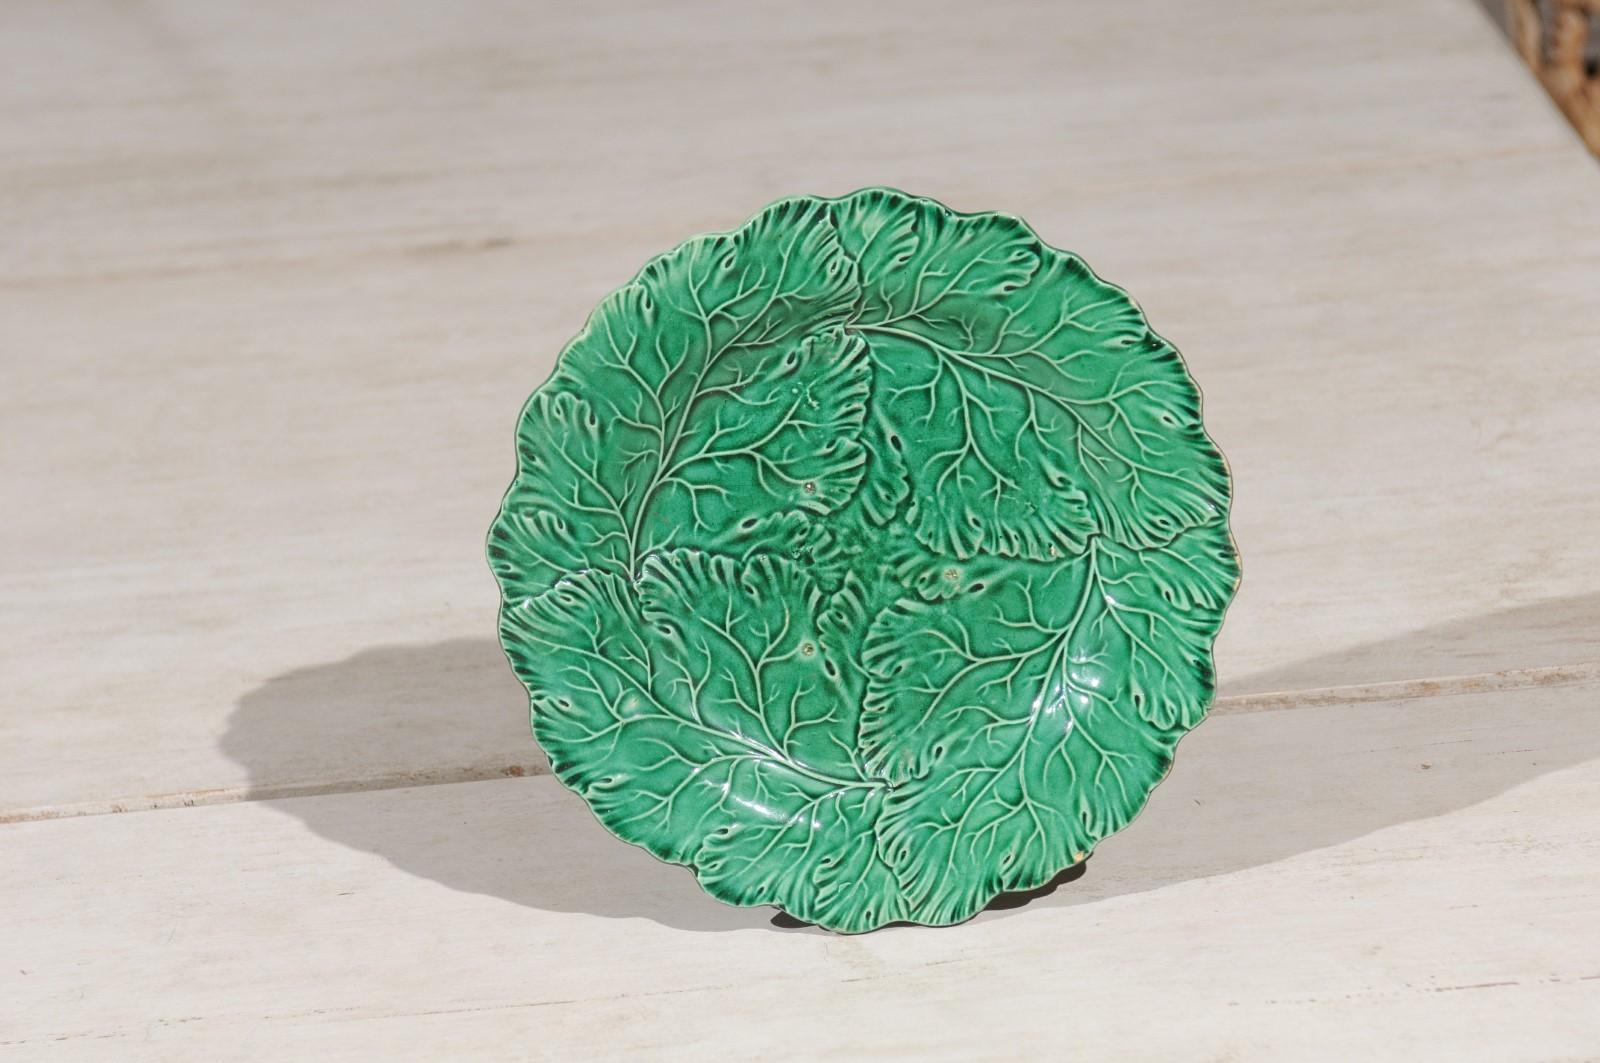 A French green majolica leaf plate from the late 19th century, with scalloped edge. Born in France in the later years of the politically dynamic 19th century, this lovely plate features a vivid green color enhancing beautifully the leafy décor of